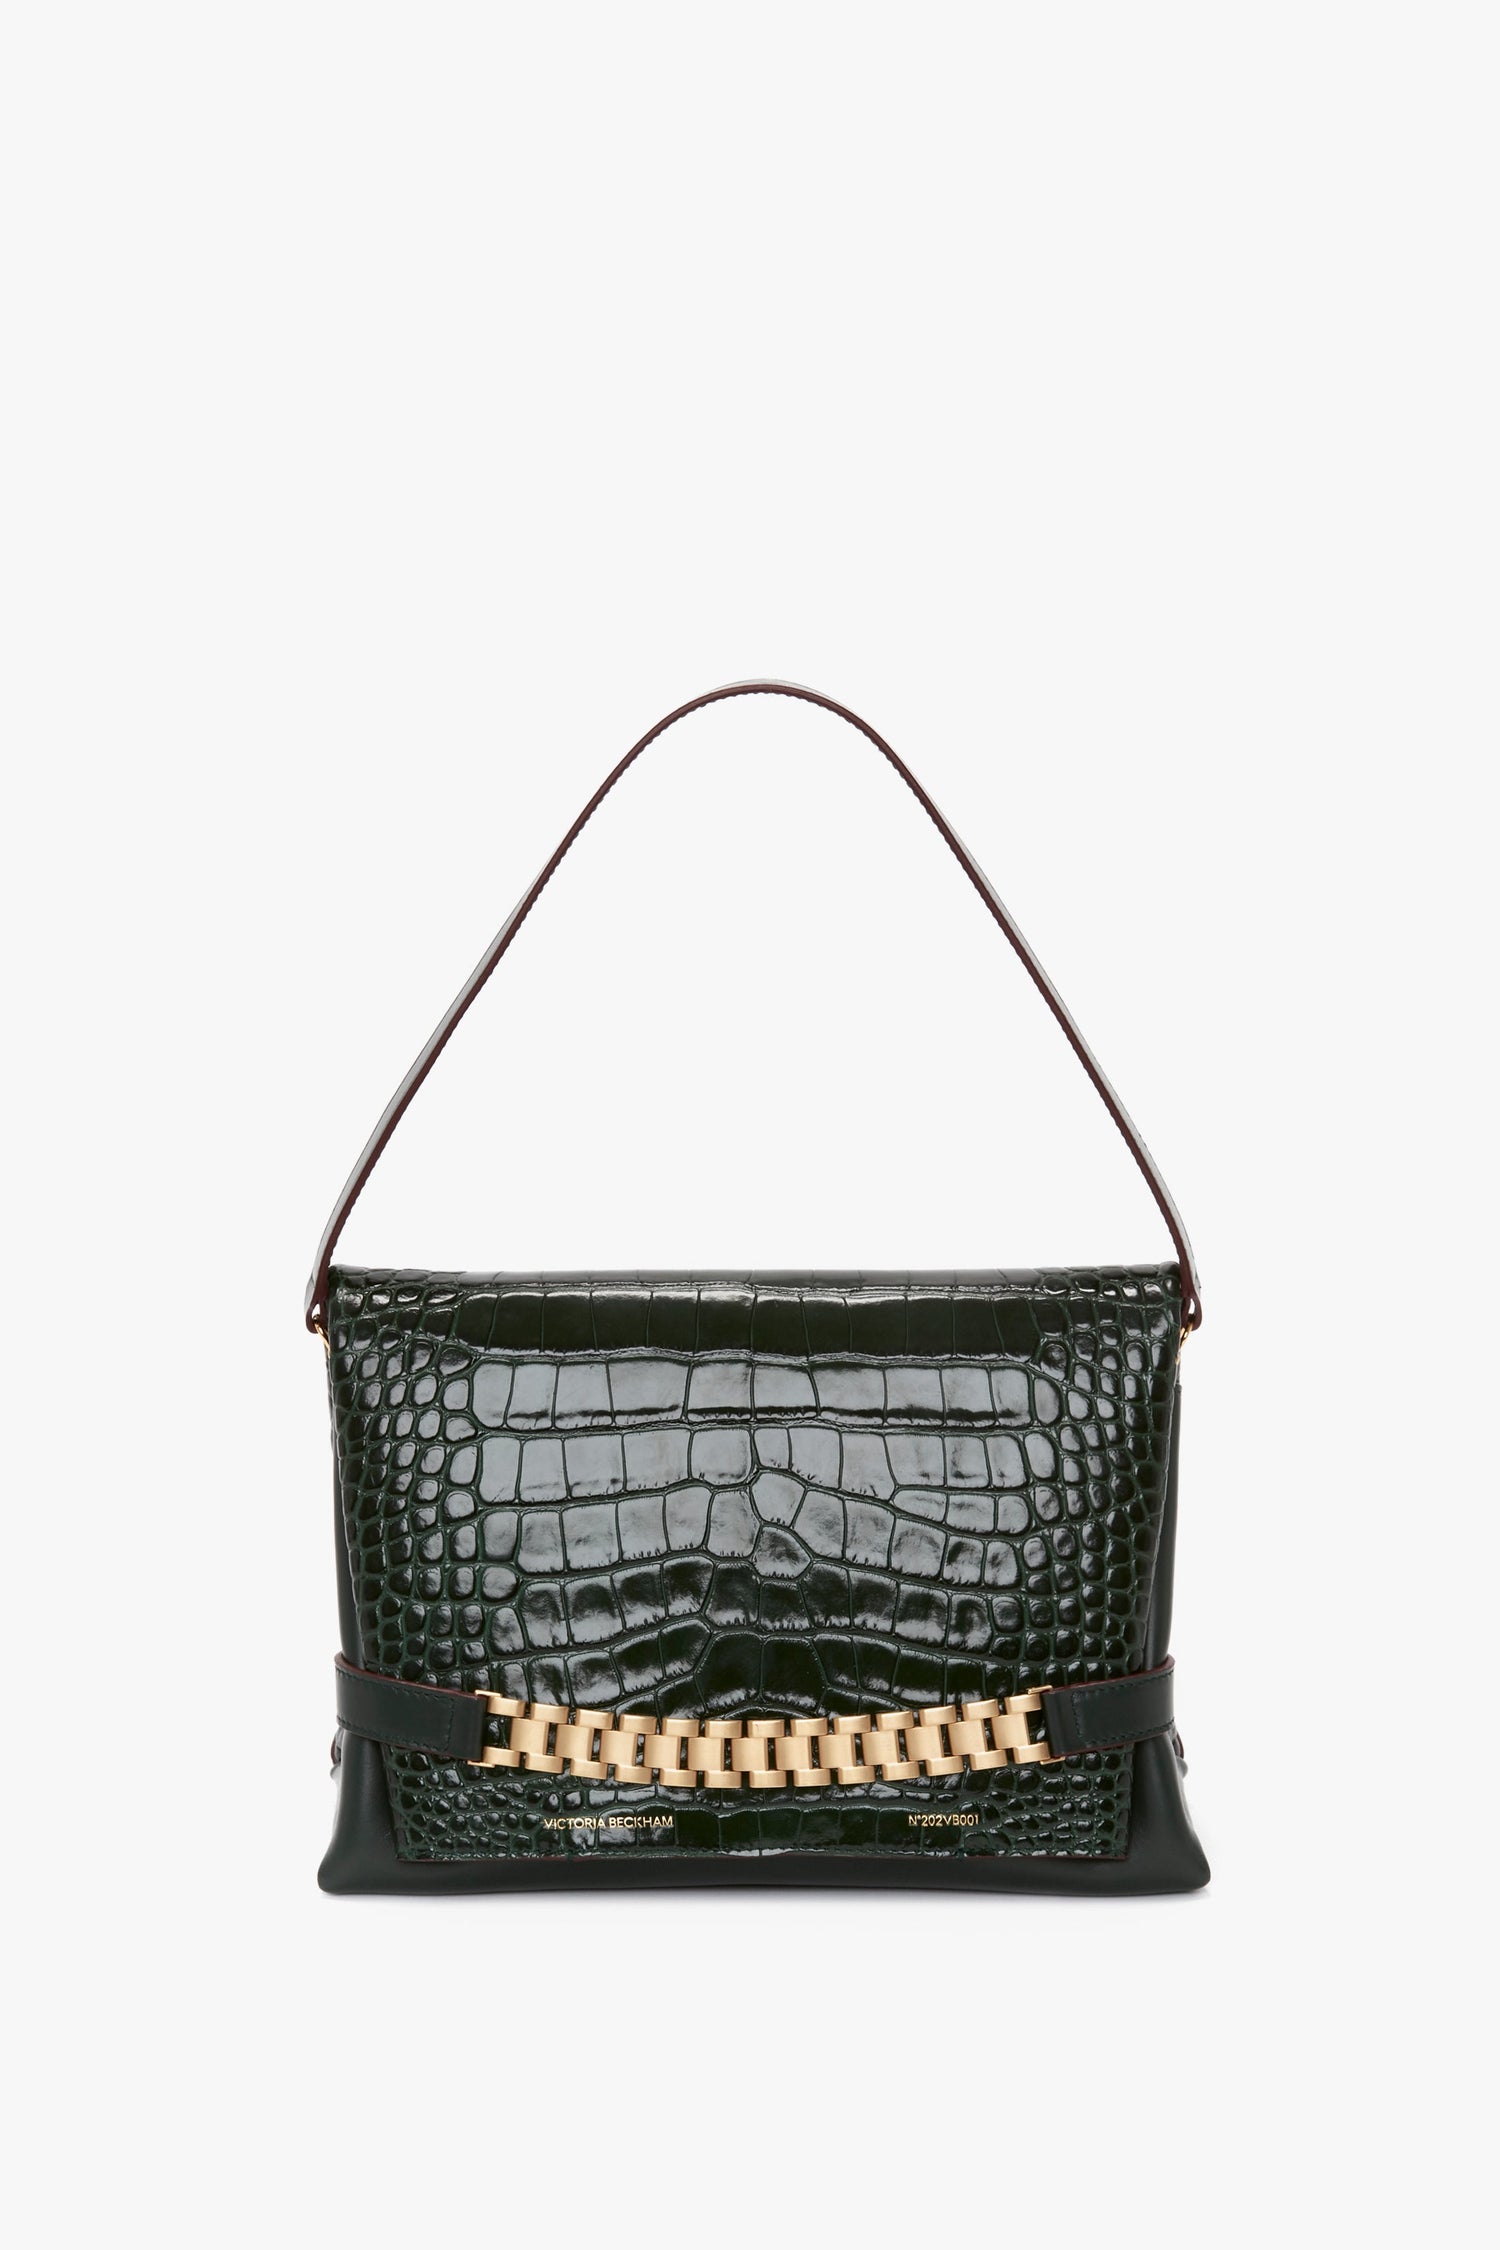 Shop Strathberry Stylist Croc-Embossed Leather Clutch-on-Chain